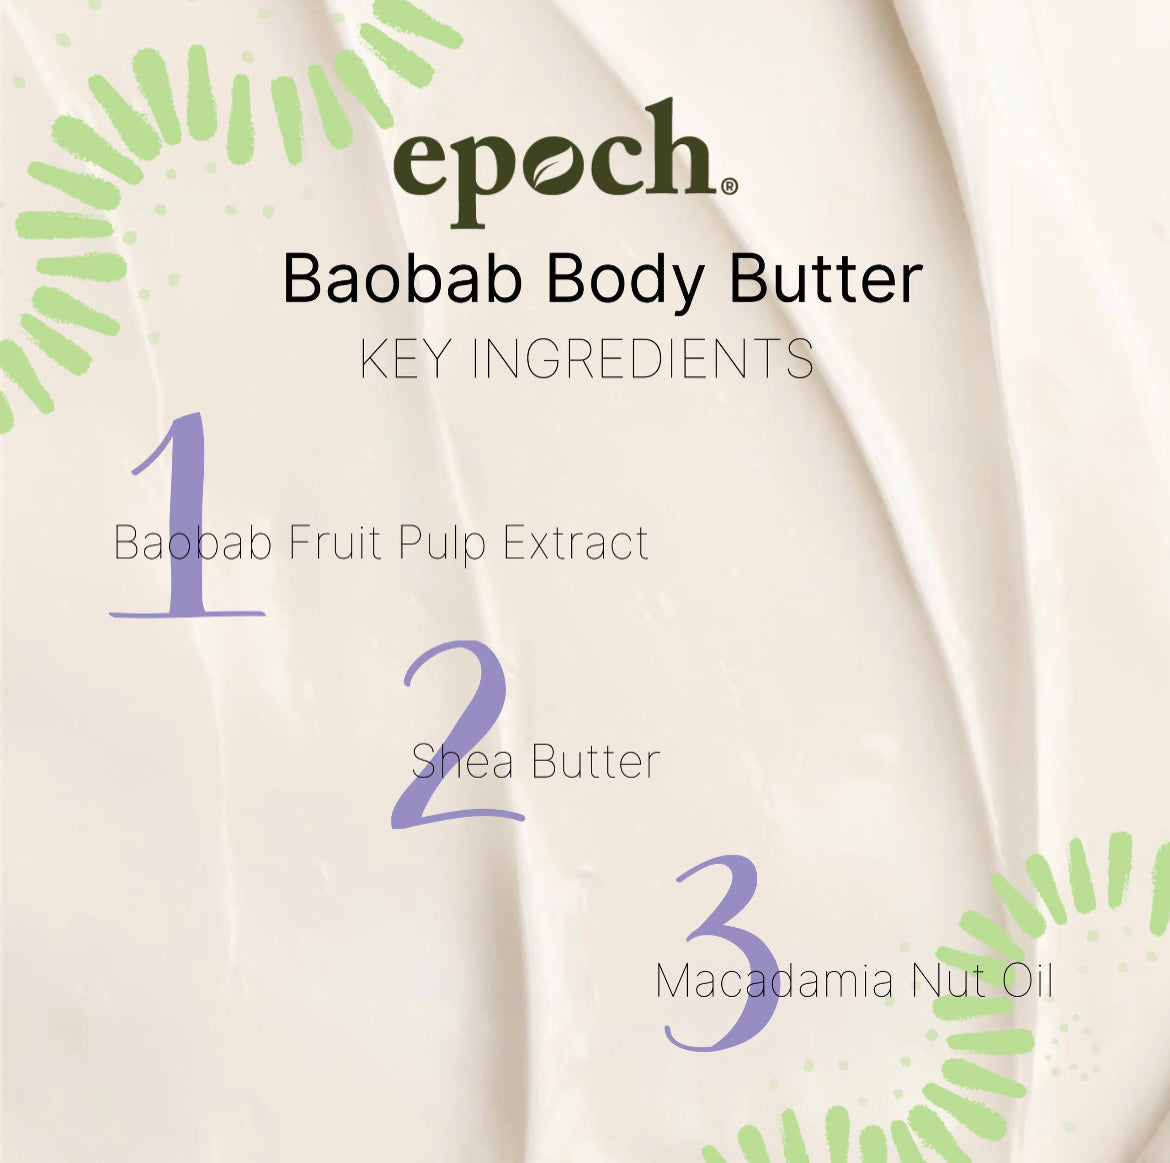 Epoch® Baobab Body Butter TubeBuy Epoch® Baobab Body Butter Tube
* Discount will apply at checkout. 
A rich and creamy hydrating body butter.Quench your skin’s thirst with a rich cream that leaveEpoch® Baobab Body Butter Tube